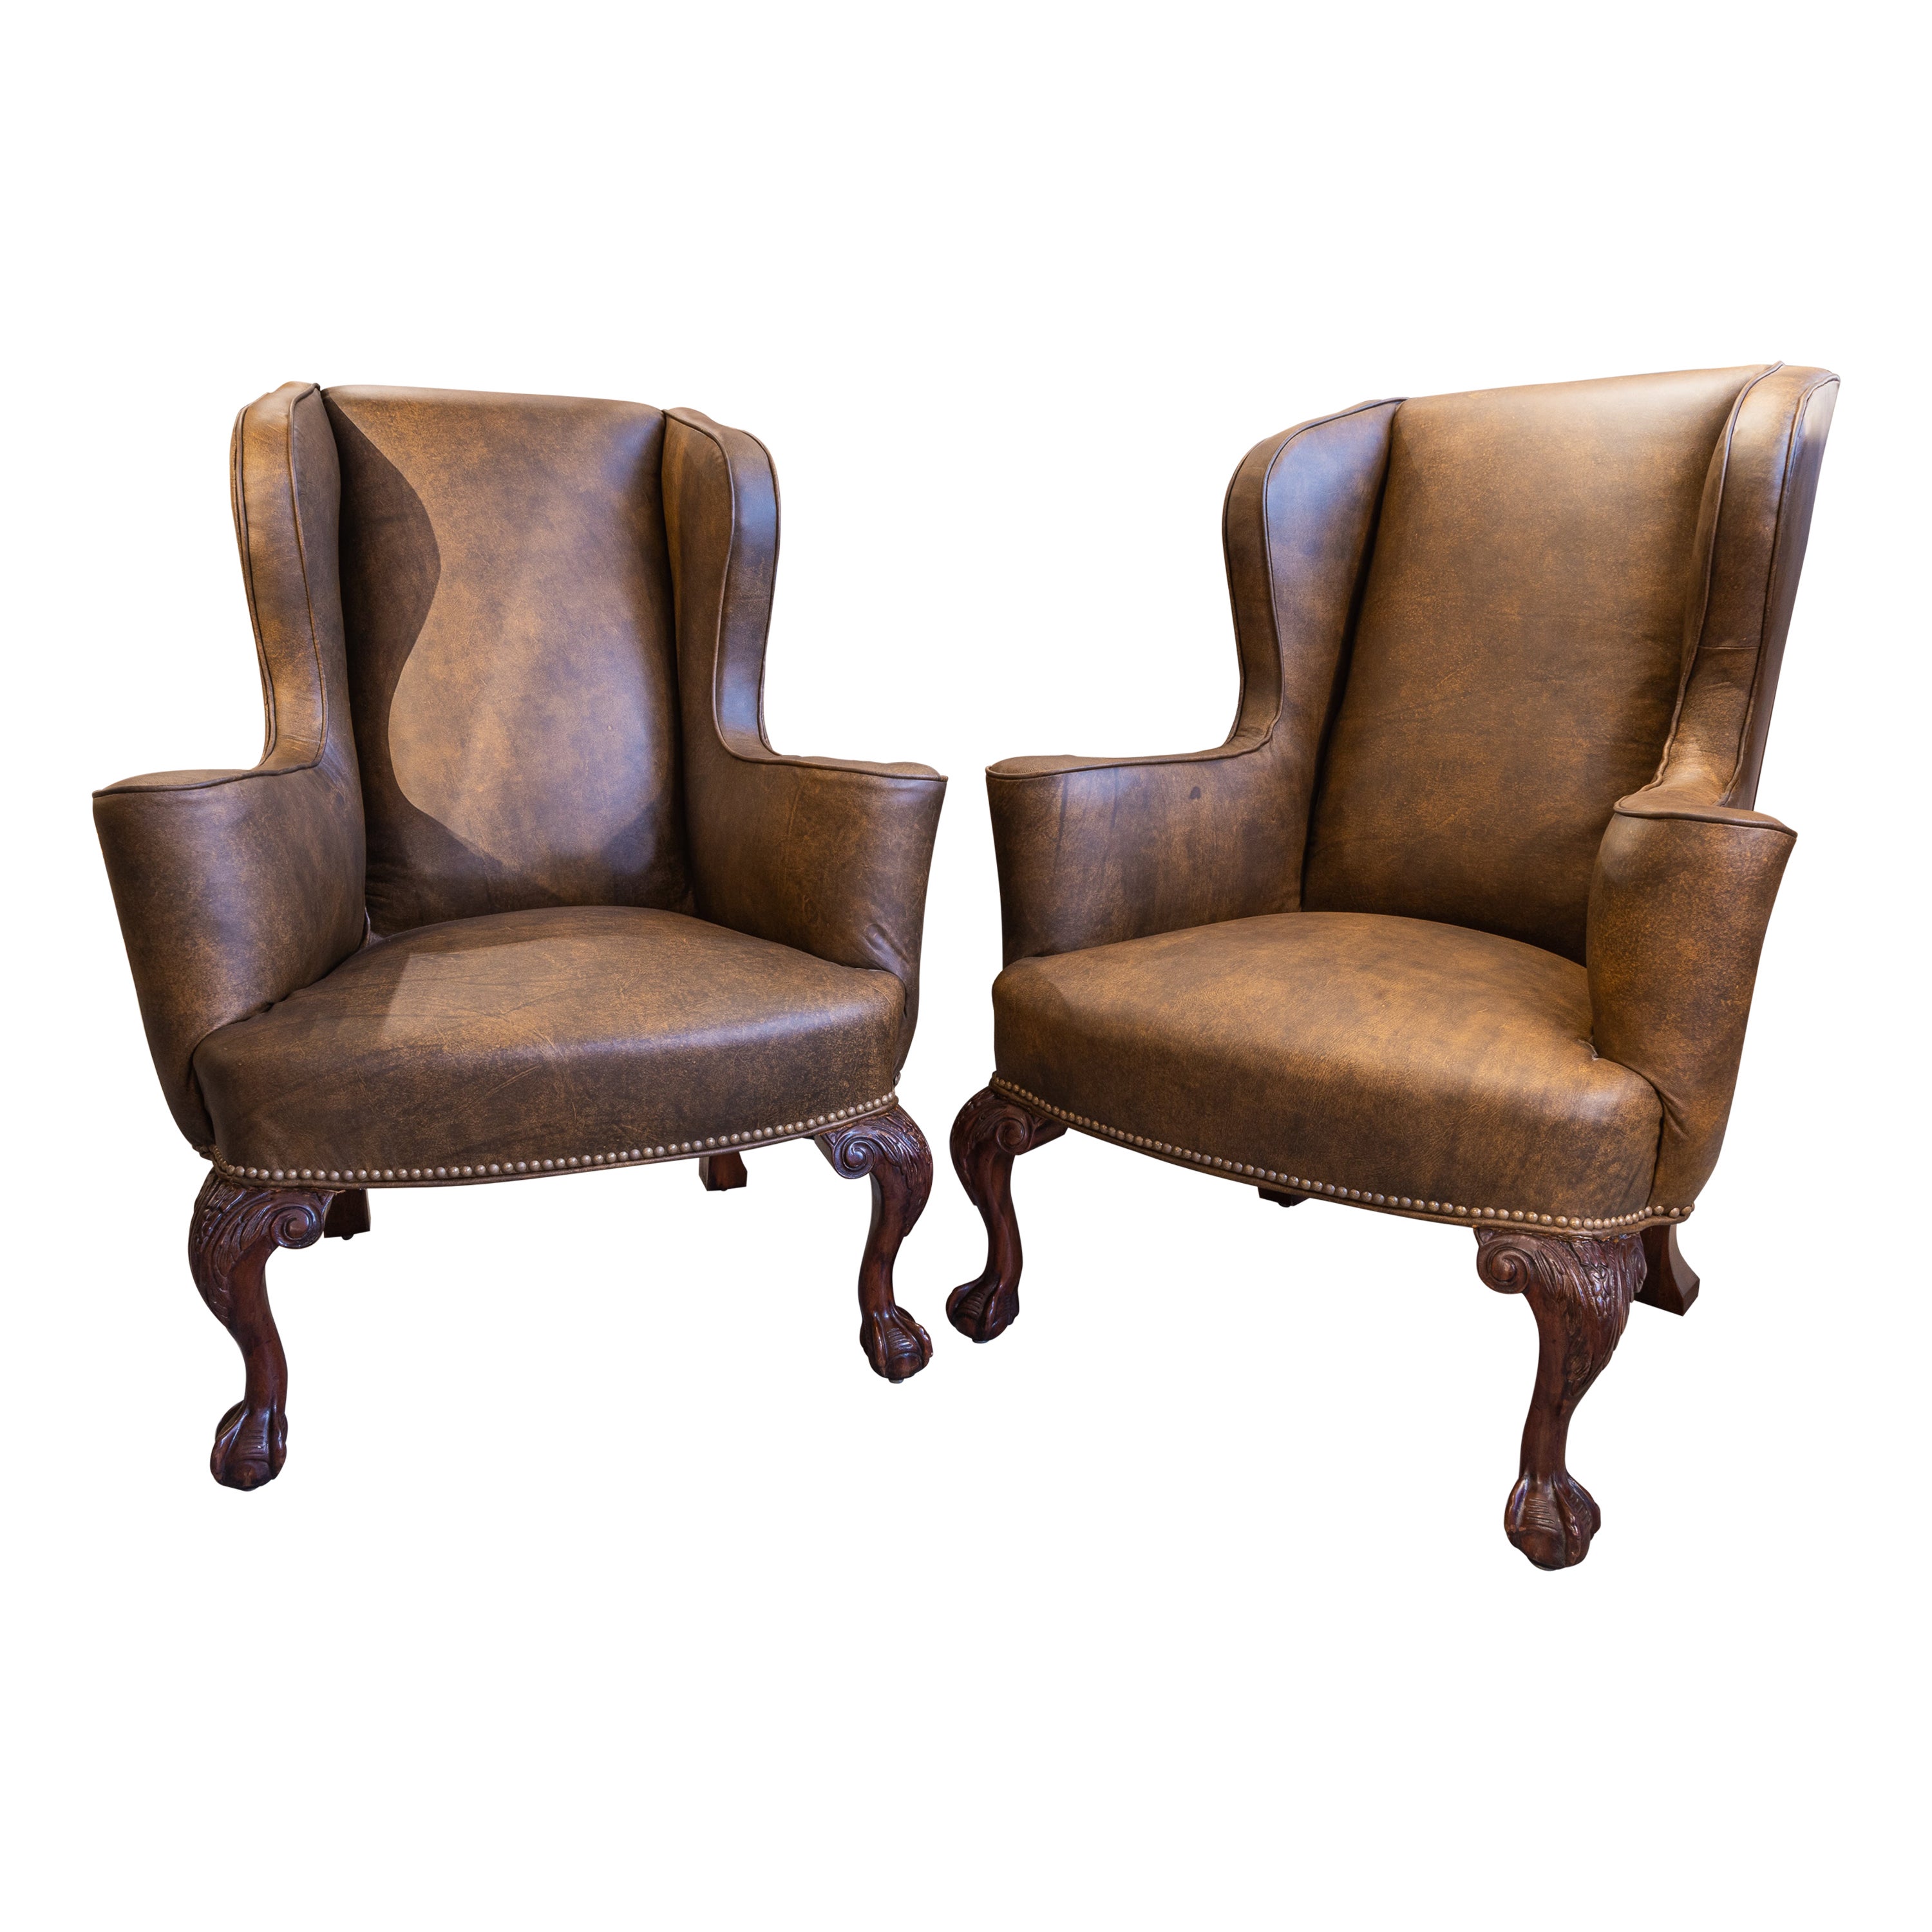 A  pair of 19th c George 1 style mahogany English wingchairs . Ball and claw 